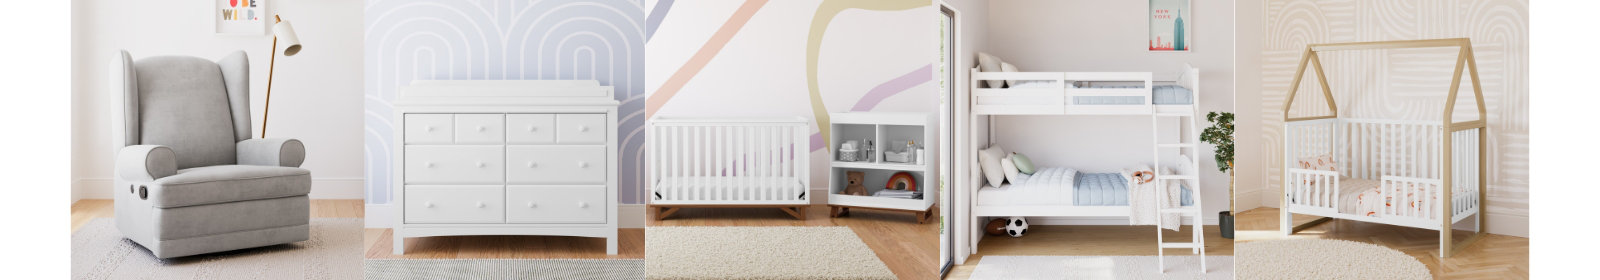 Nearly 80 years of bringing dream nurseries and kids bedrooms to life.